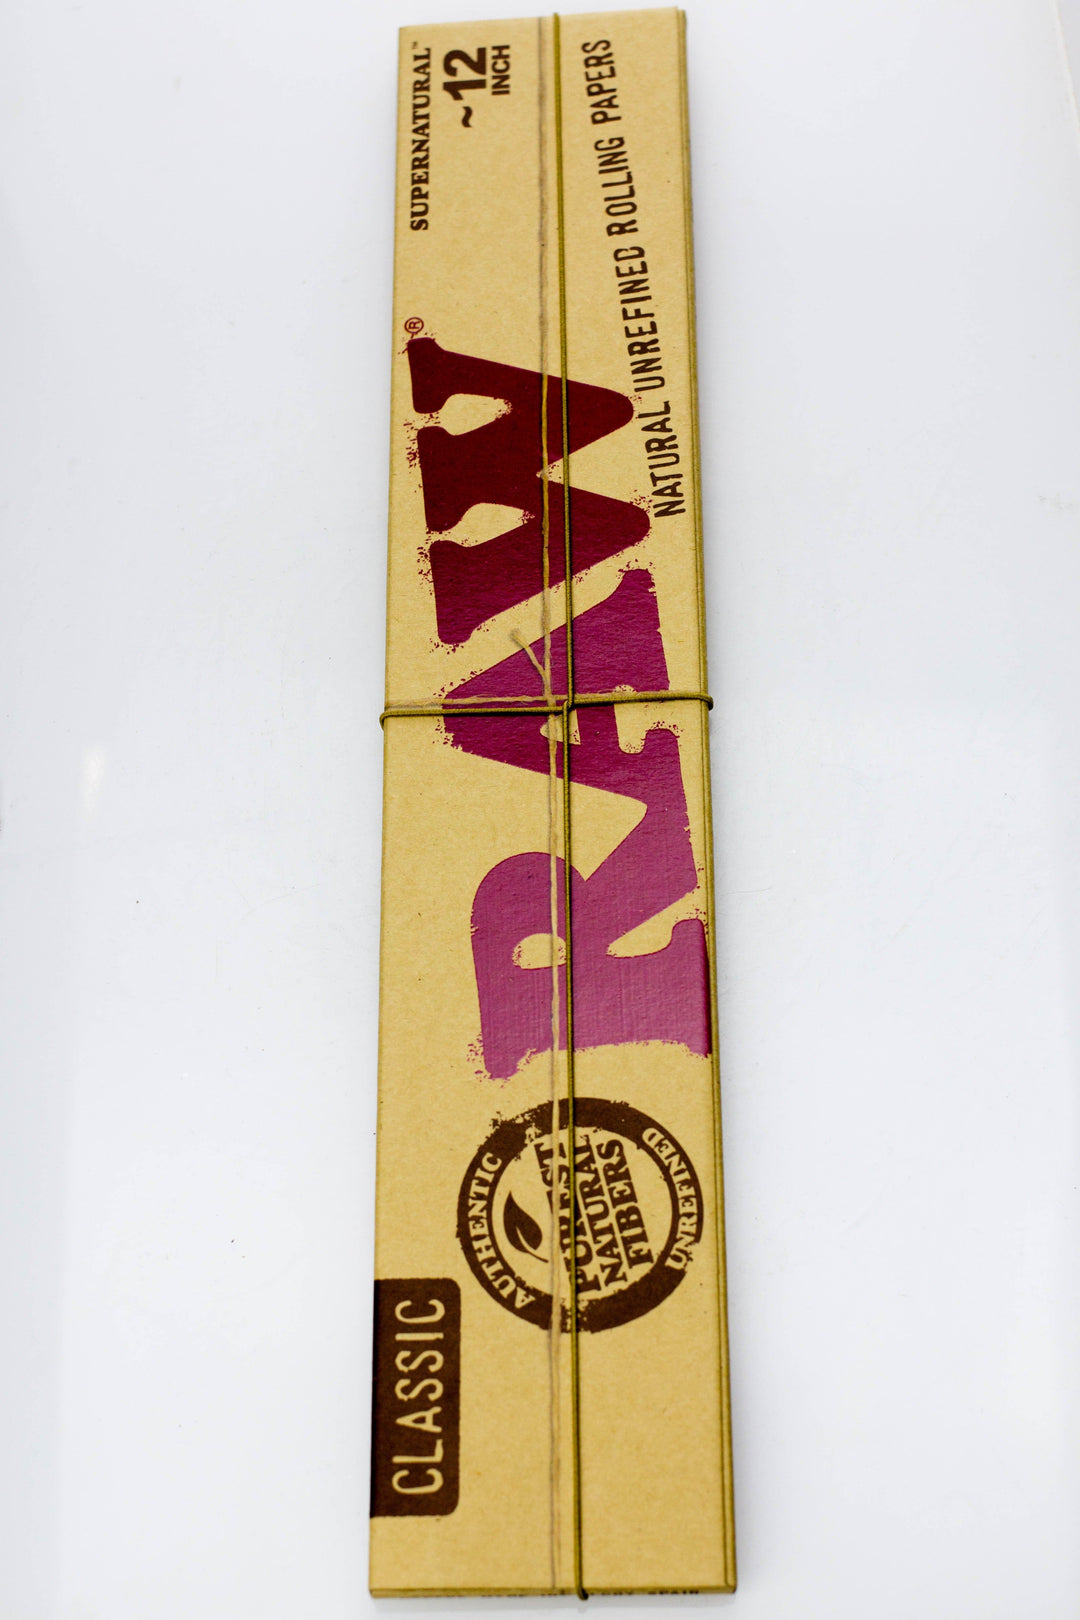 RAW Supernatural 12 in. rolling paper